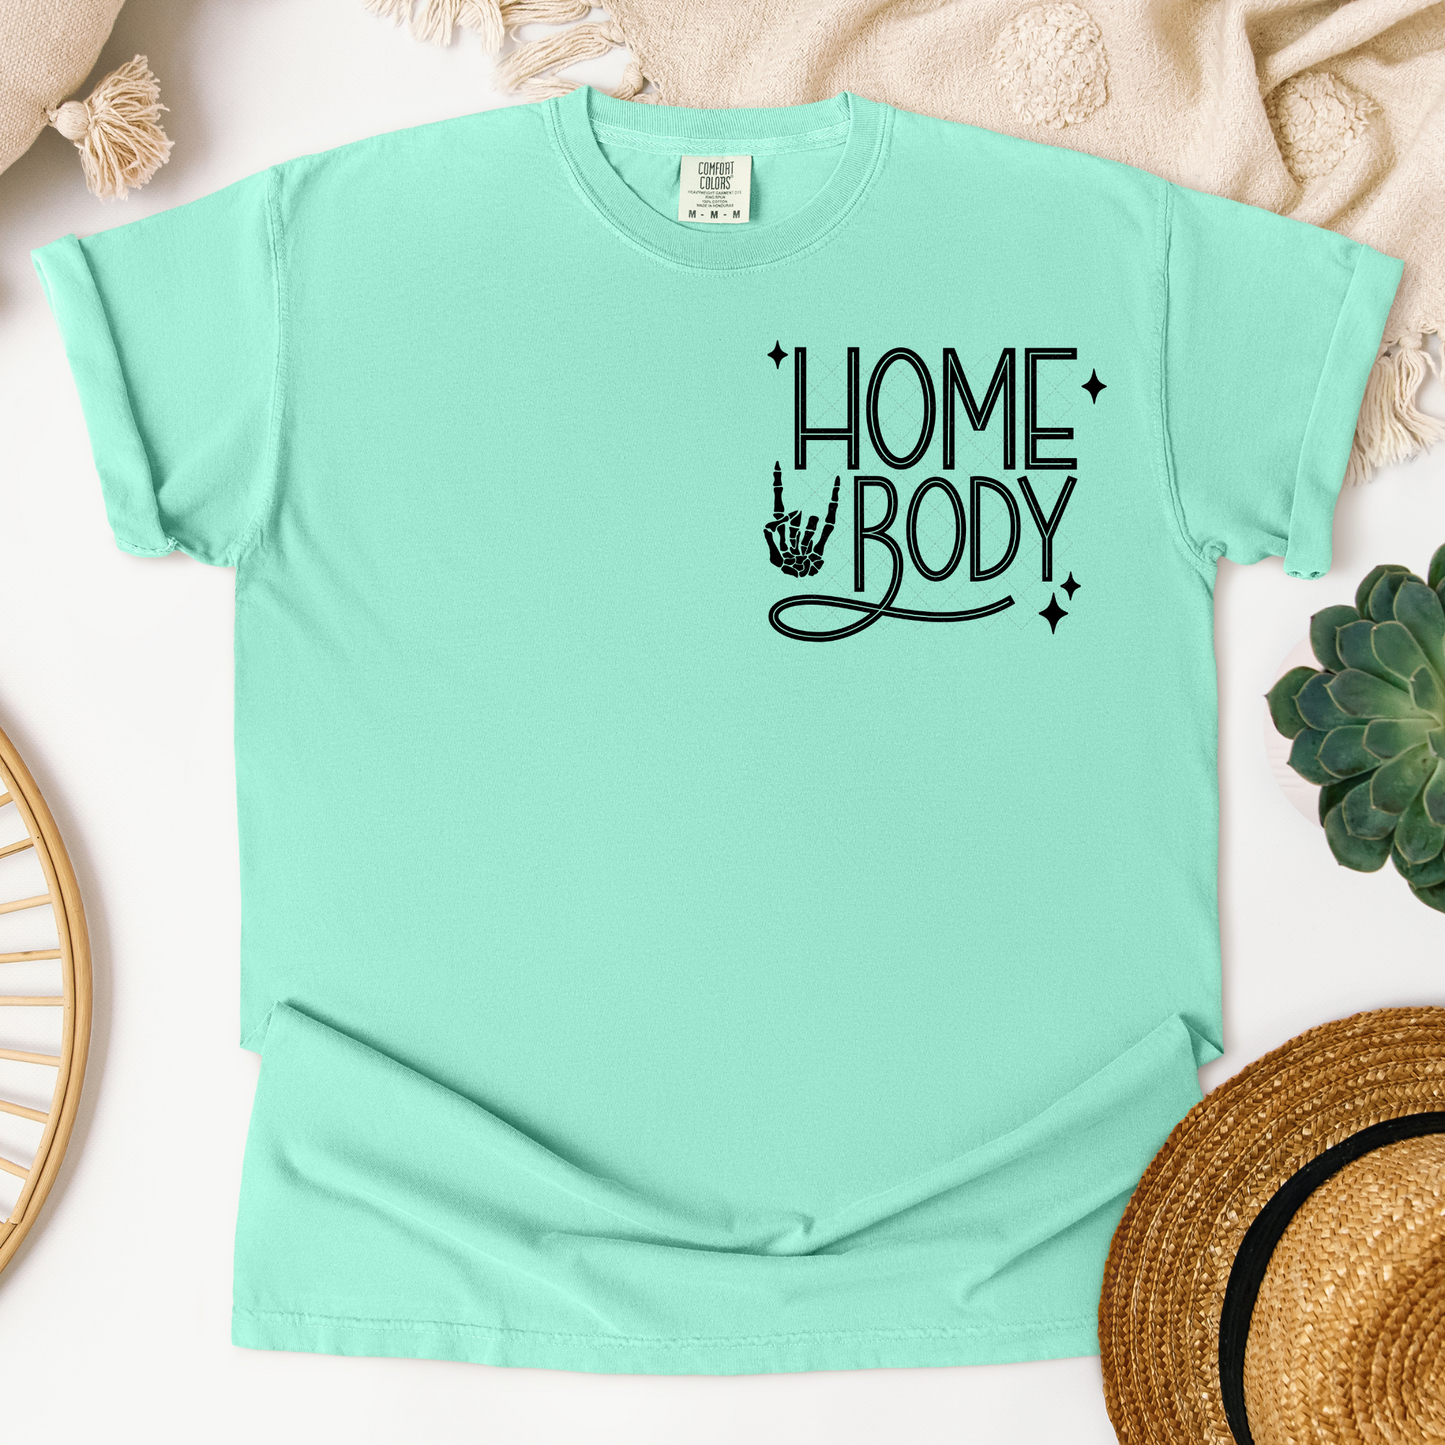 Home Body Black **TWO PART* SOLD SEPARATELY** Transfer